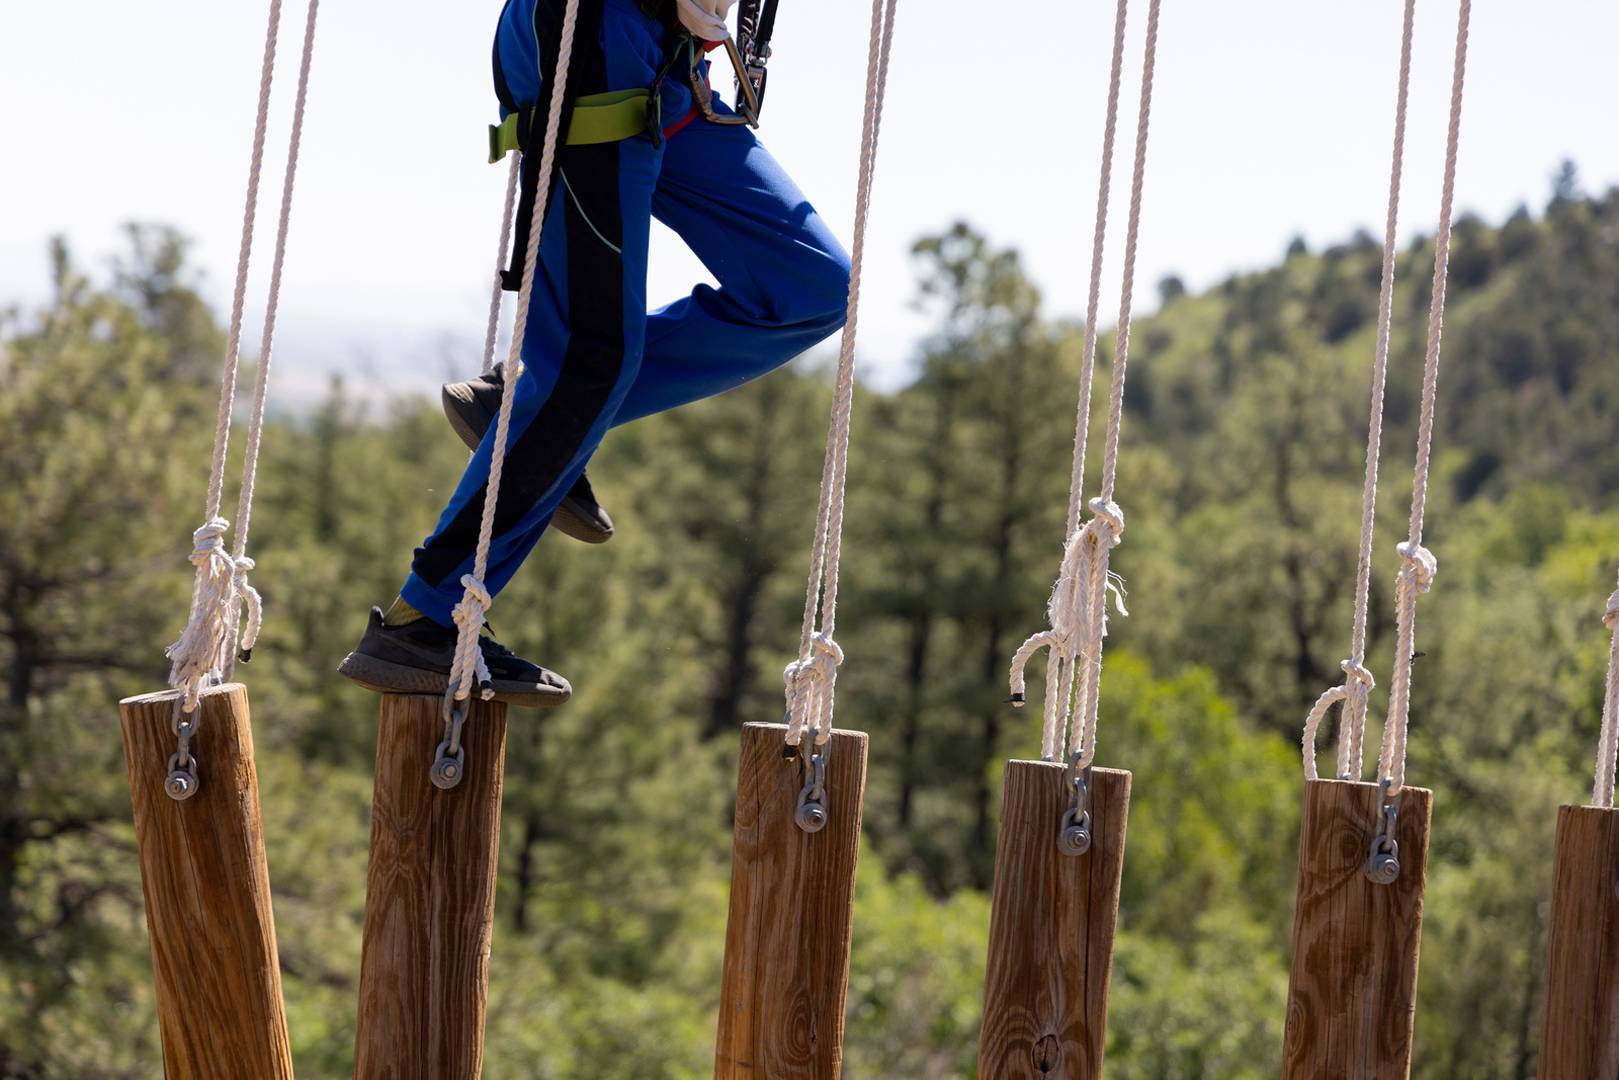 Philmont Training Center participants challenge themselves on a COPE course near the Tooth of Time in Cimarron, N.M., on June 29, 2022.